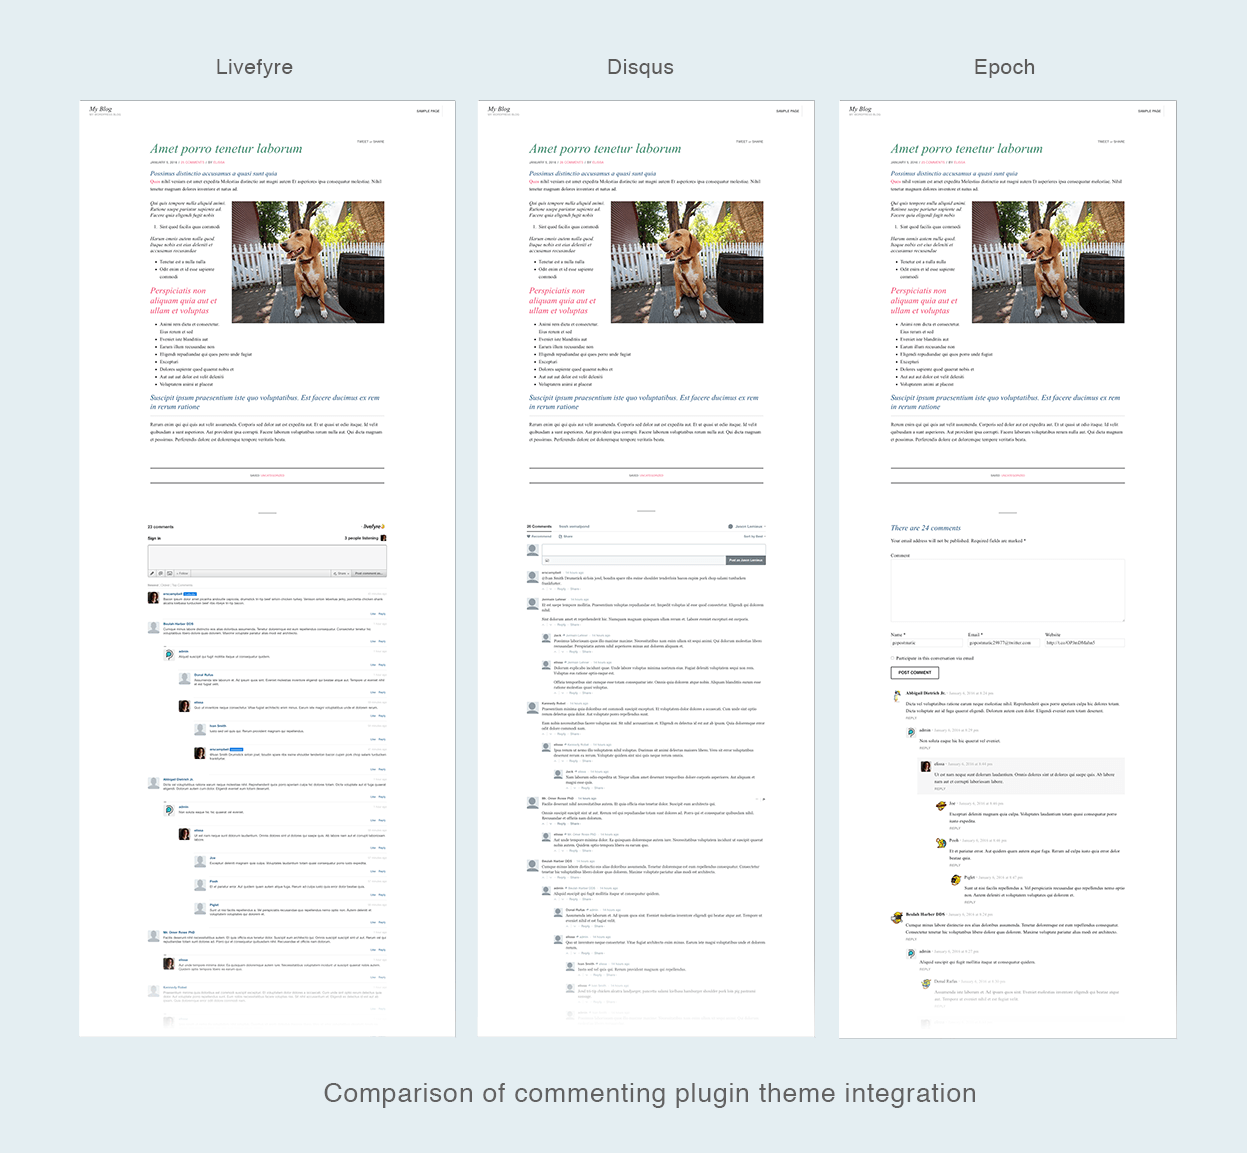 Visual comparison of Livefyre, Disqus, and Epoch commenting plugins